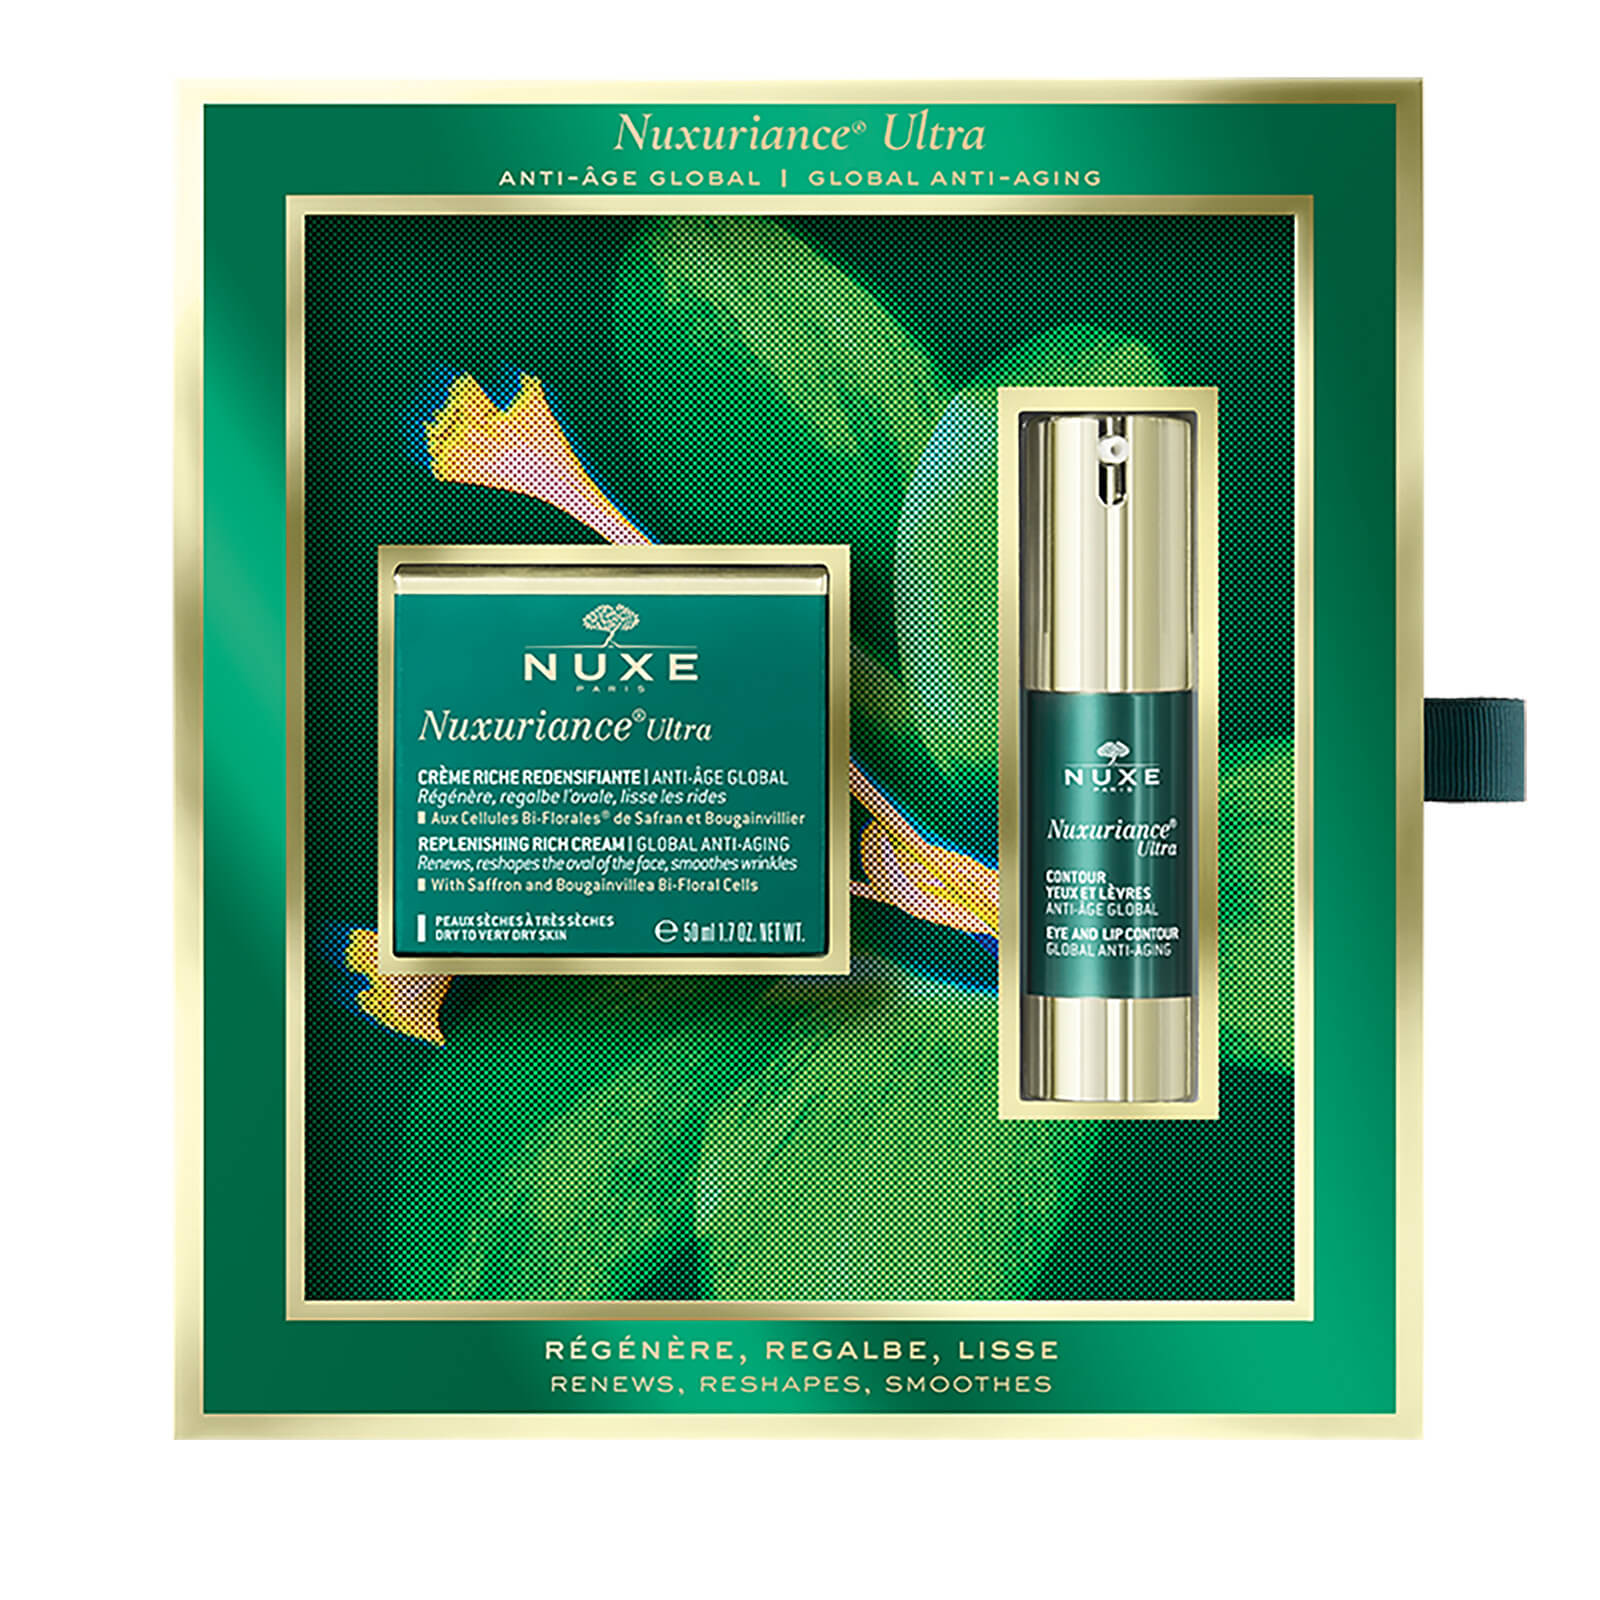 NUXE Nuxuriance Ultra Anti-Ageing Gift Set lookfantastic.com imagine